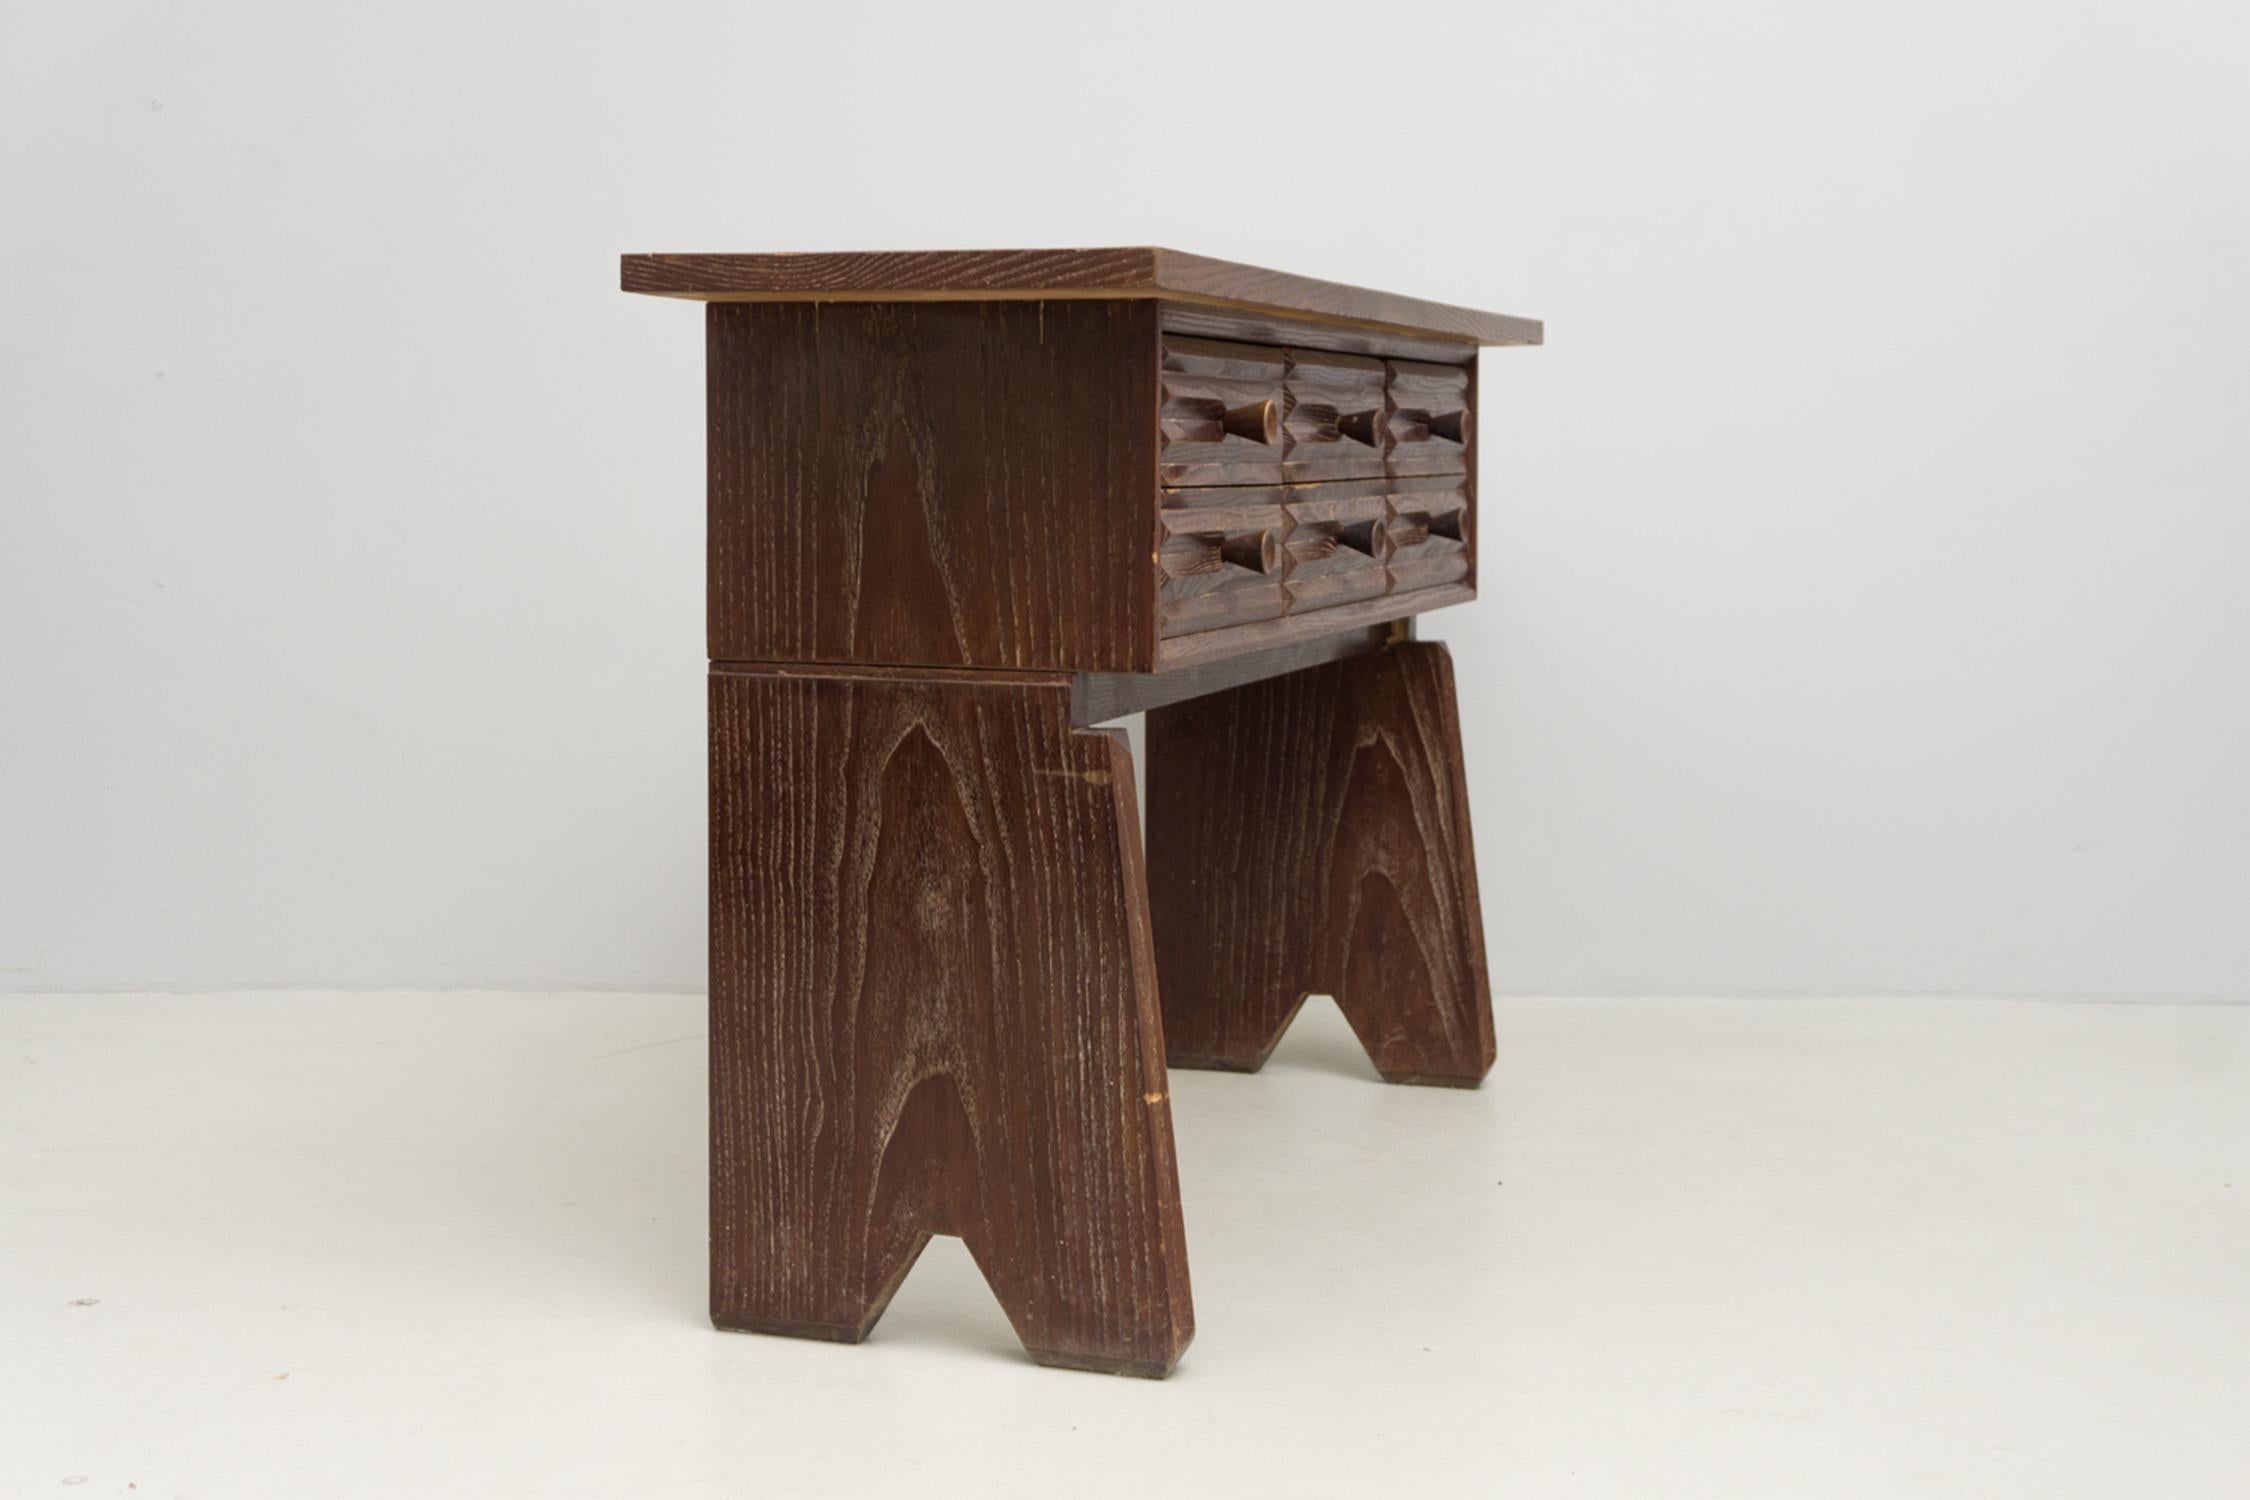 Modern Solid Wood Sideboard with Drawers by Paolo Buffa for Serafino Arrighi, 1948